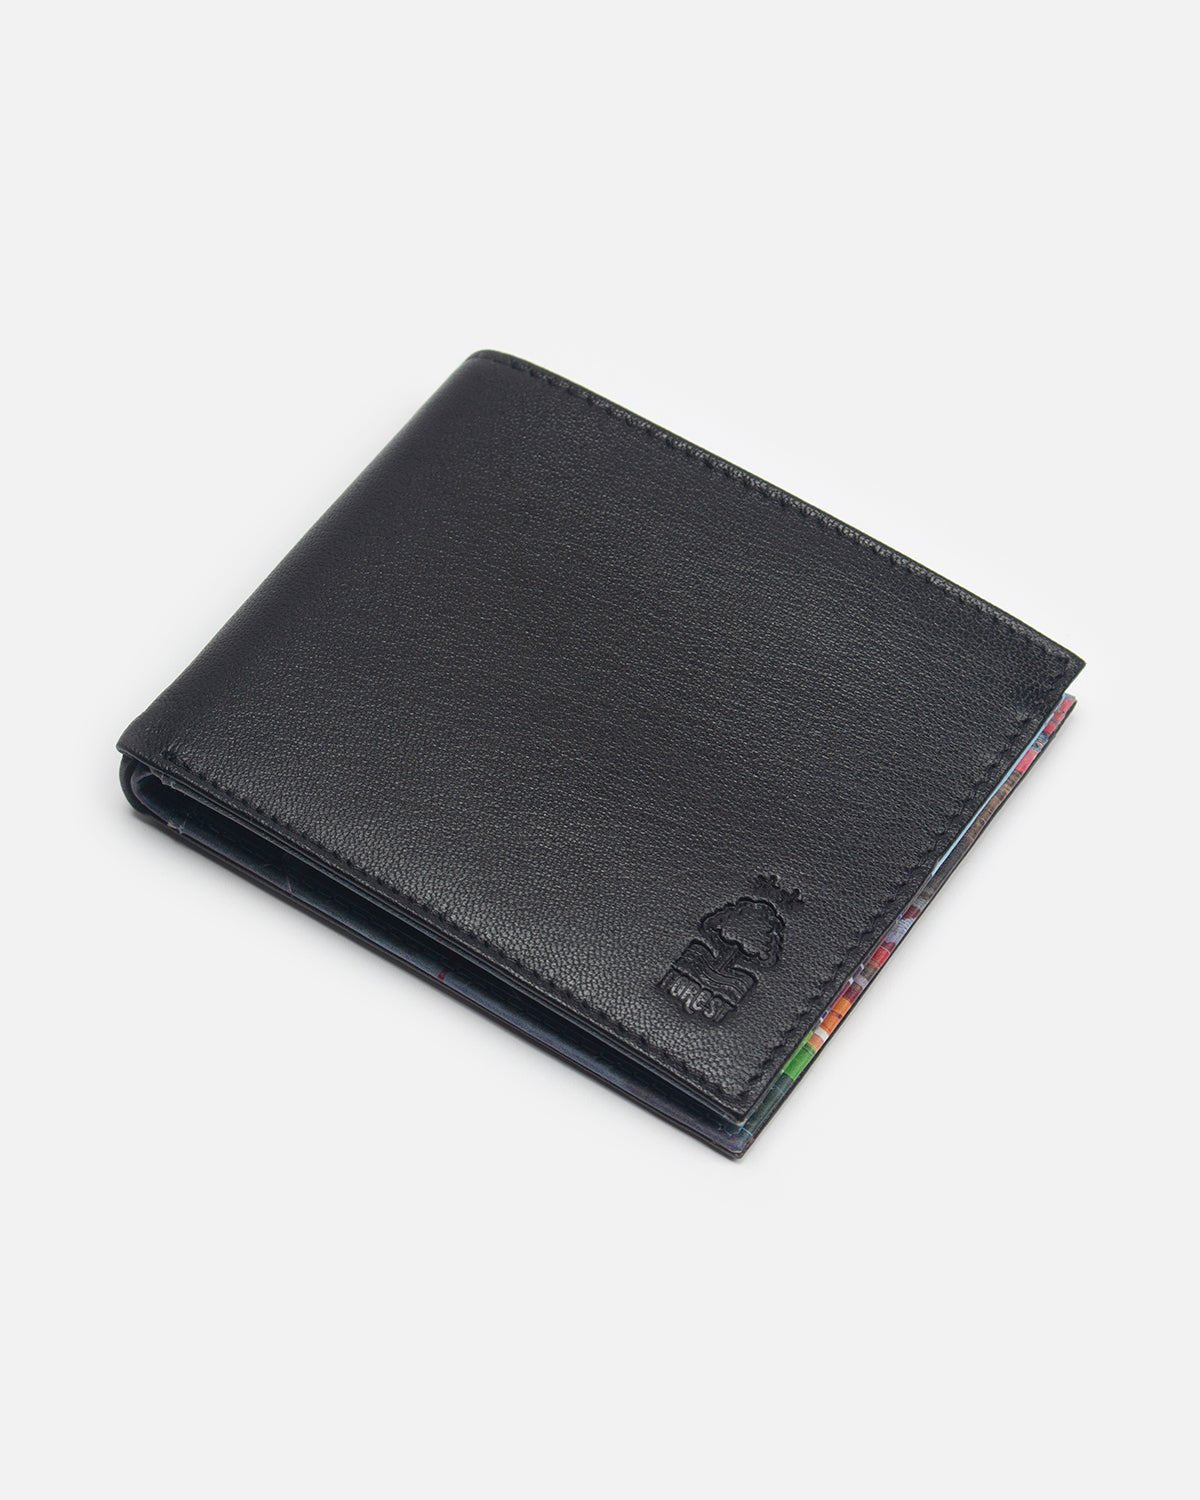 NFFC City Ground Wallet - Nottingham Forest FC